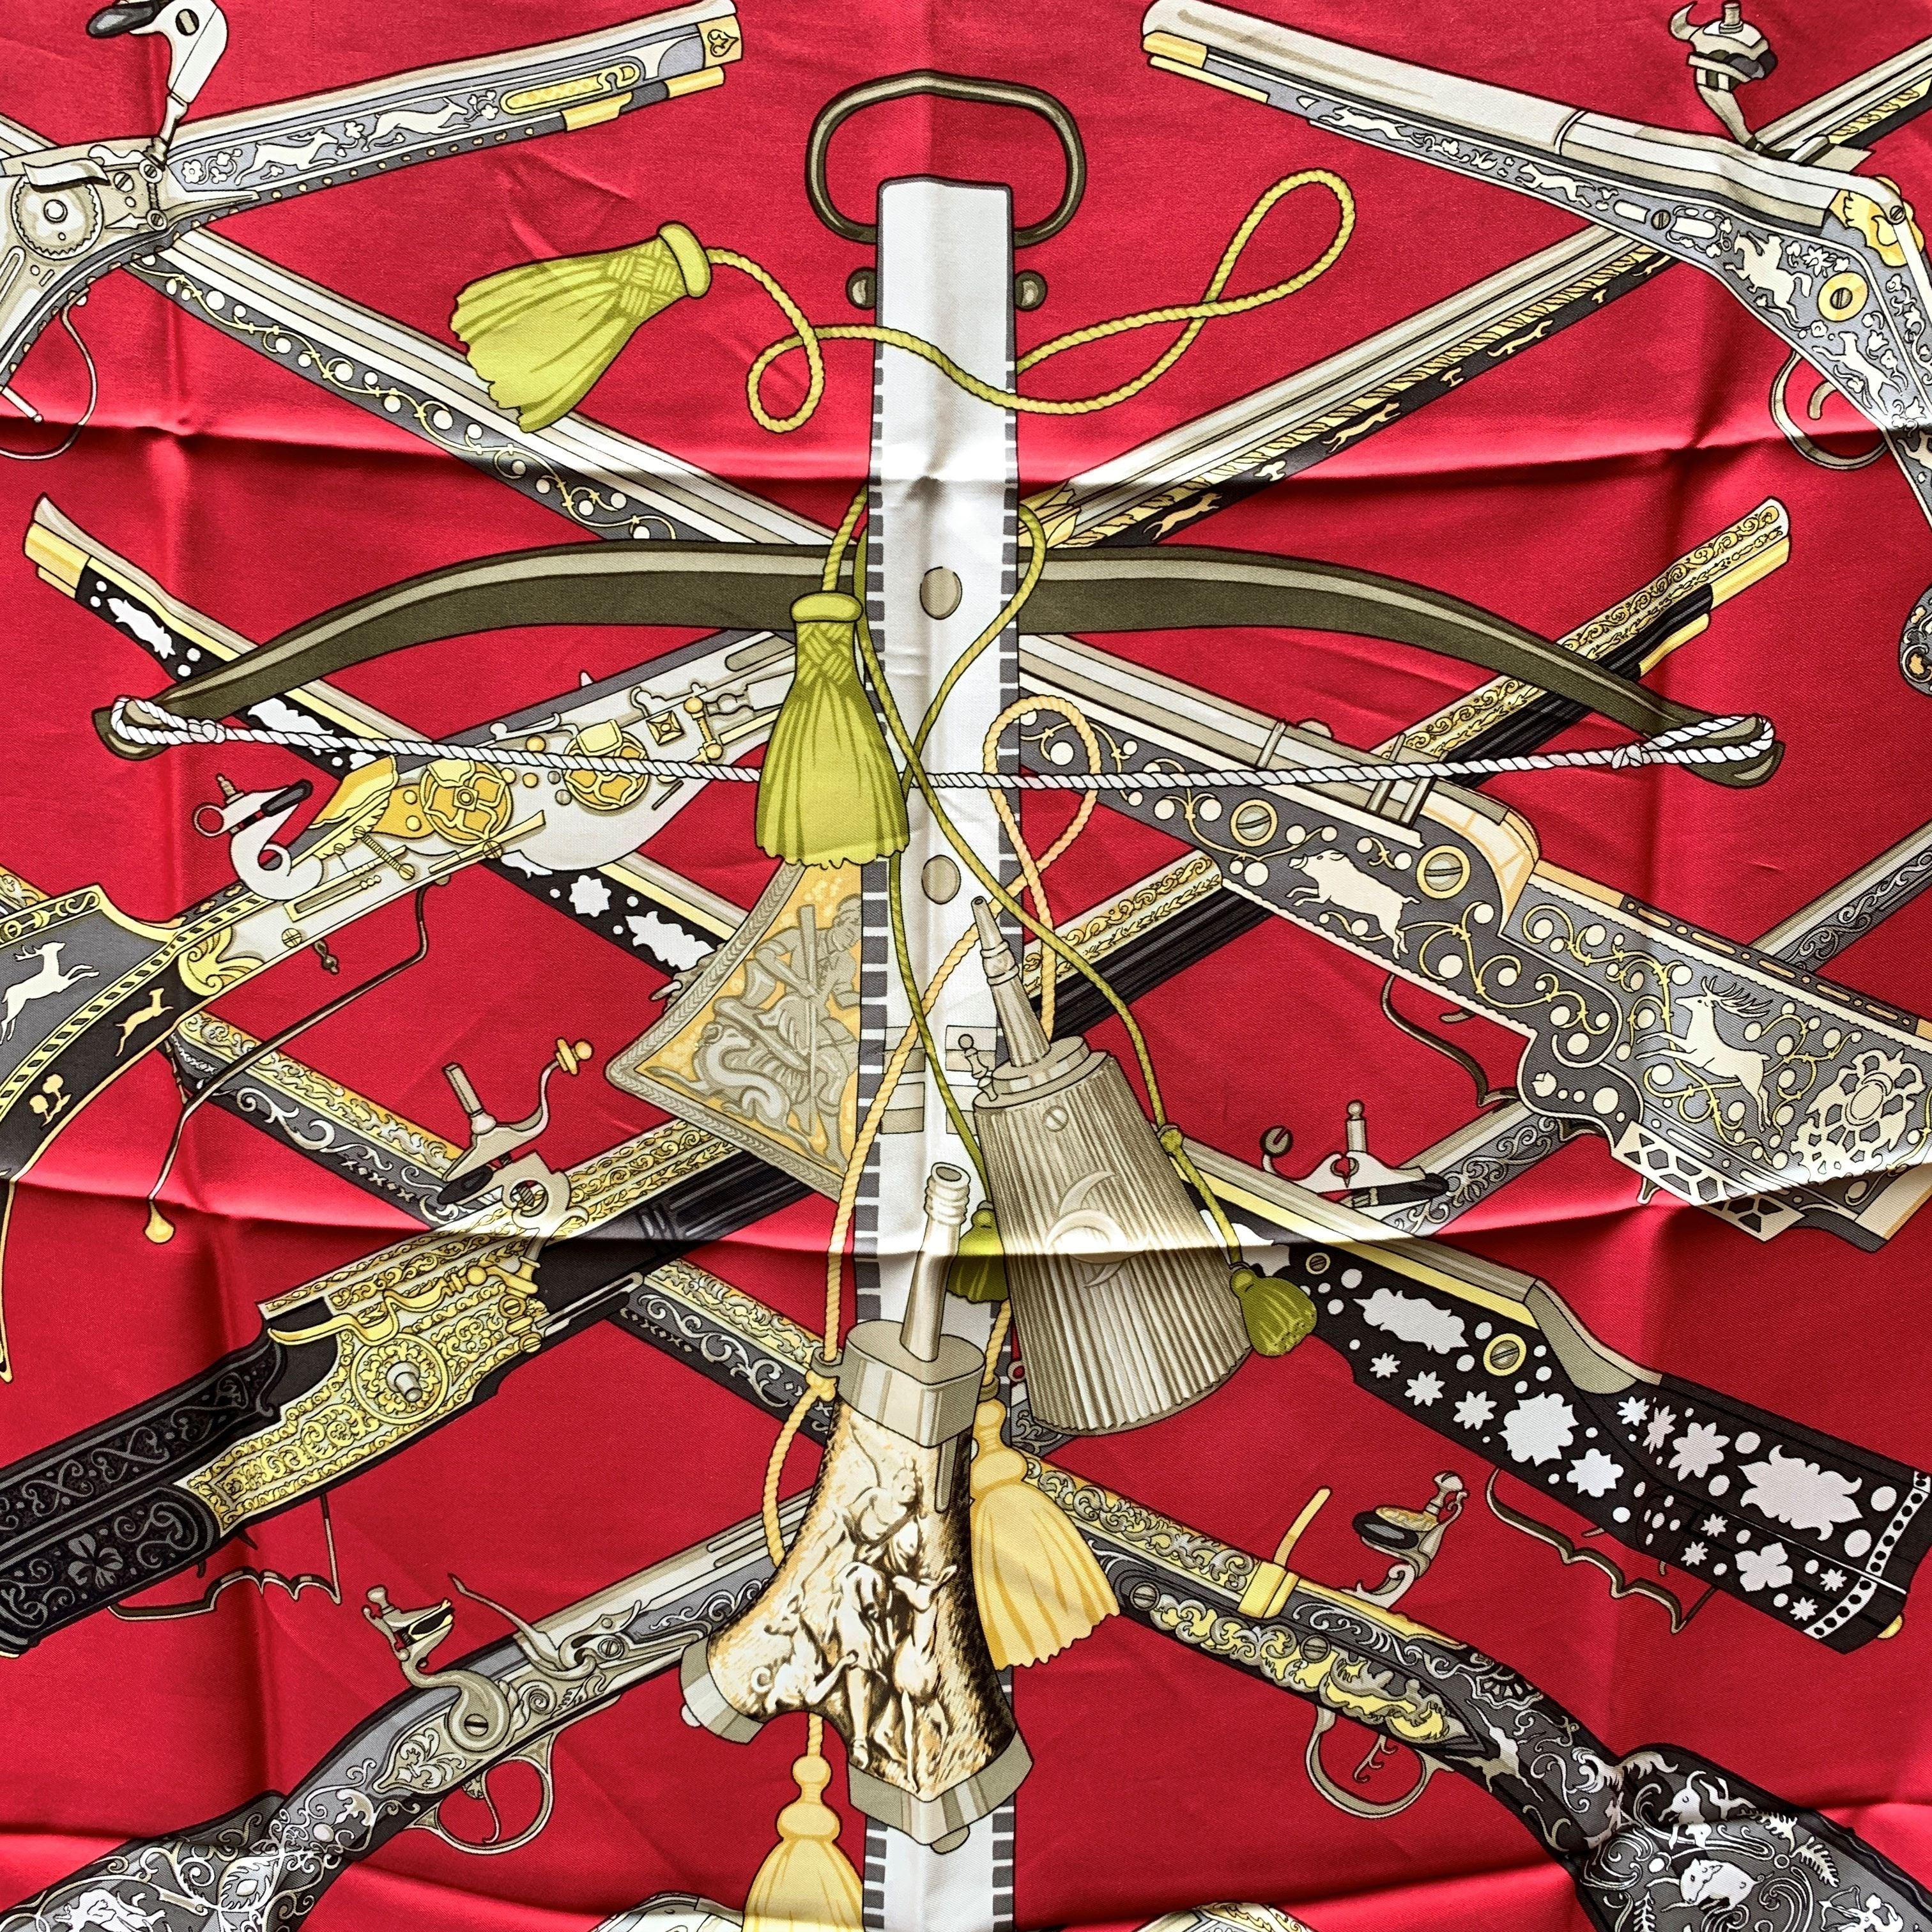 HERMES scarf 'Diane' by Henry De Linares honoring Diana, the Roman goddess of hunting and originally issued in 1972. It features various arms decorated with hunting scenes on a gorgeous red background. 100% silk, hand rolled hem, made in France.